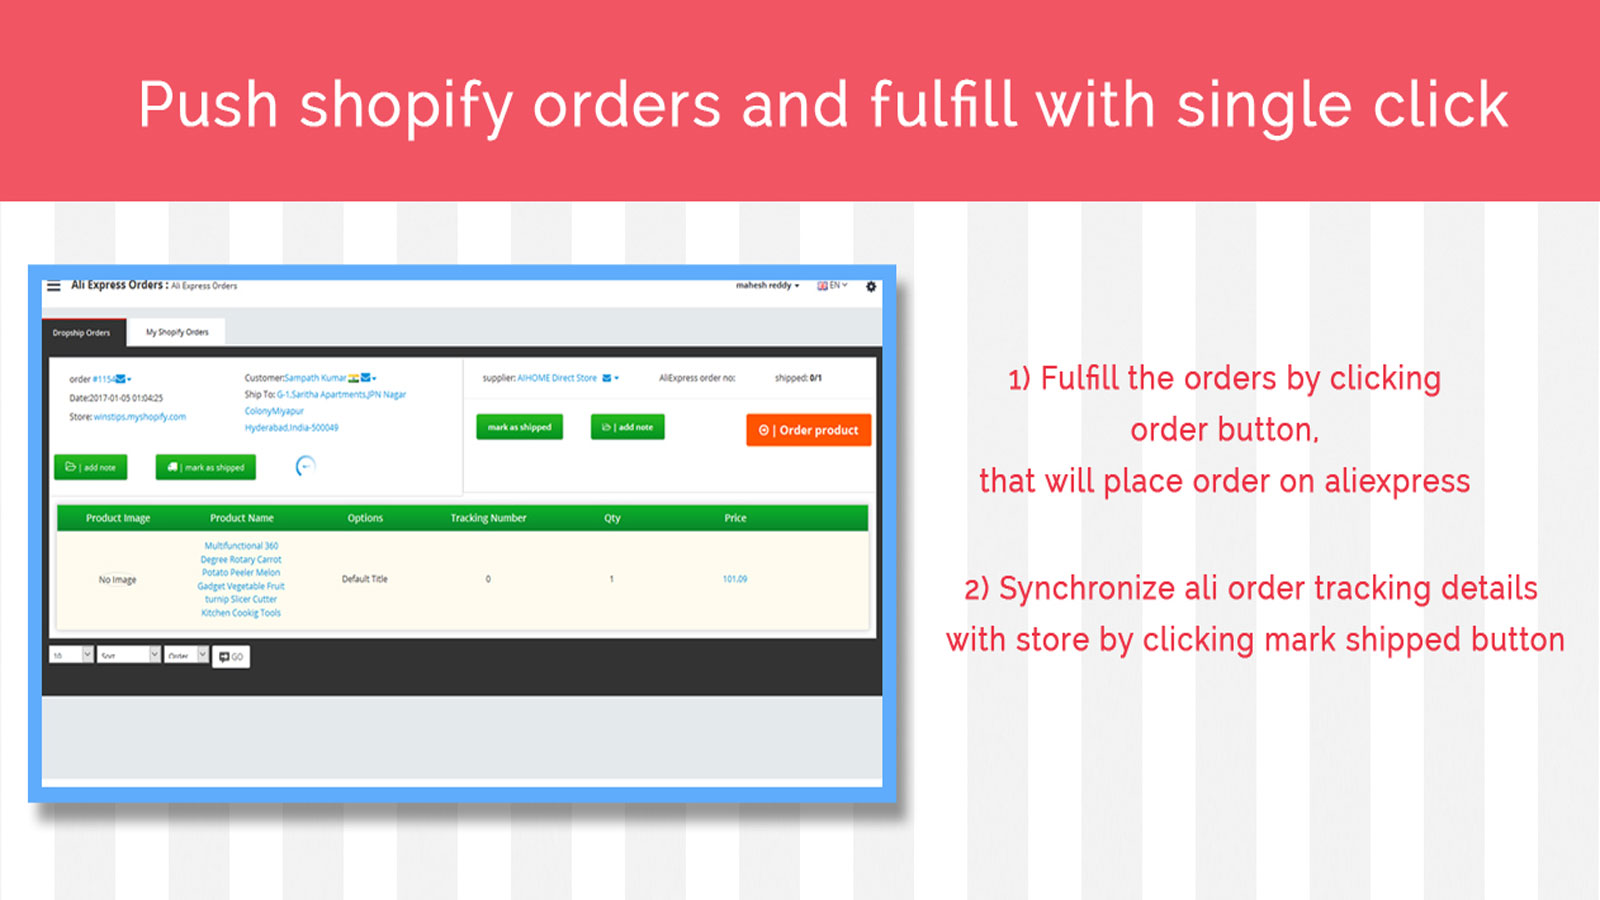 Order fulfillment  and Tracking